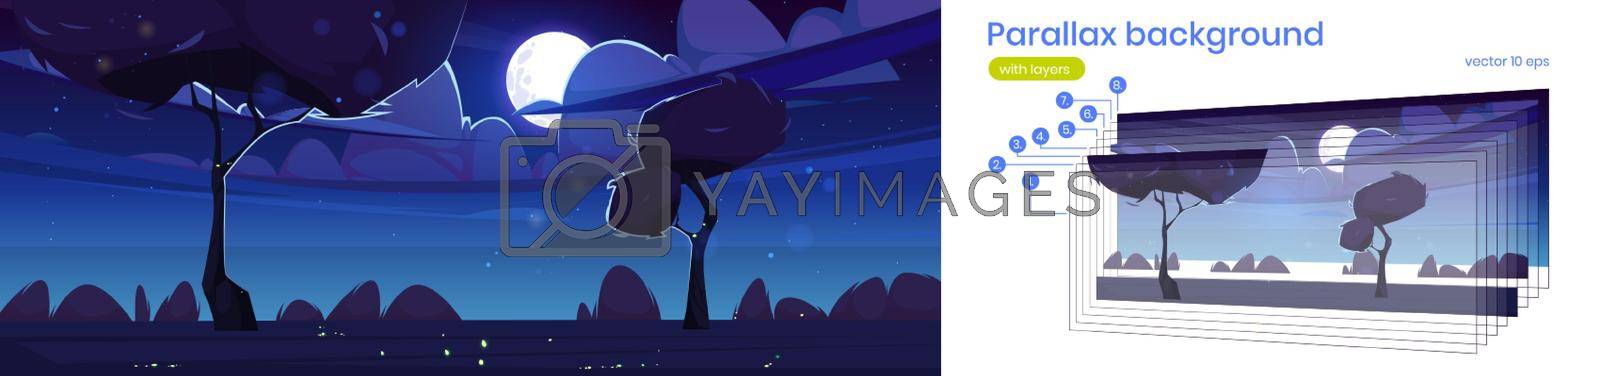 Summer landscape with trees and bushes at night. Vector parallax background for 2d animation with cartoon illustration of nature scene with lawn, fireflies, clouds, moon and stars in dark sky